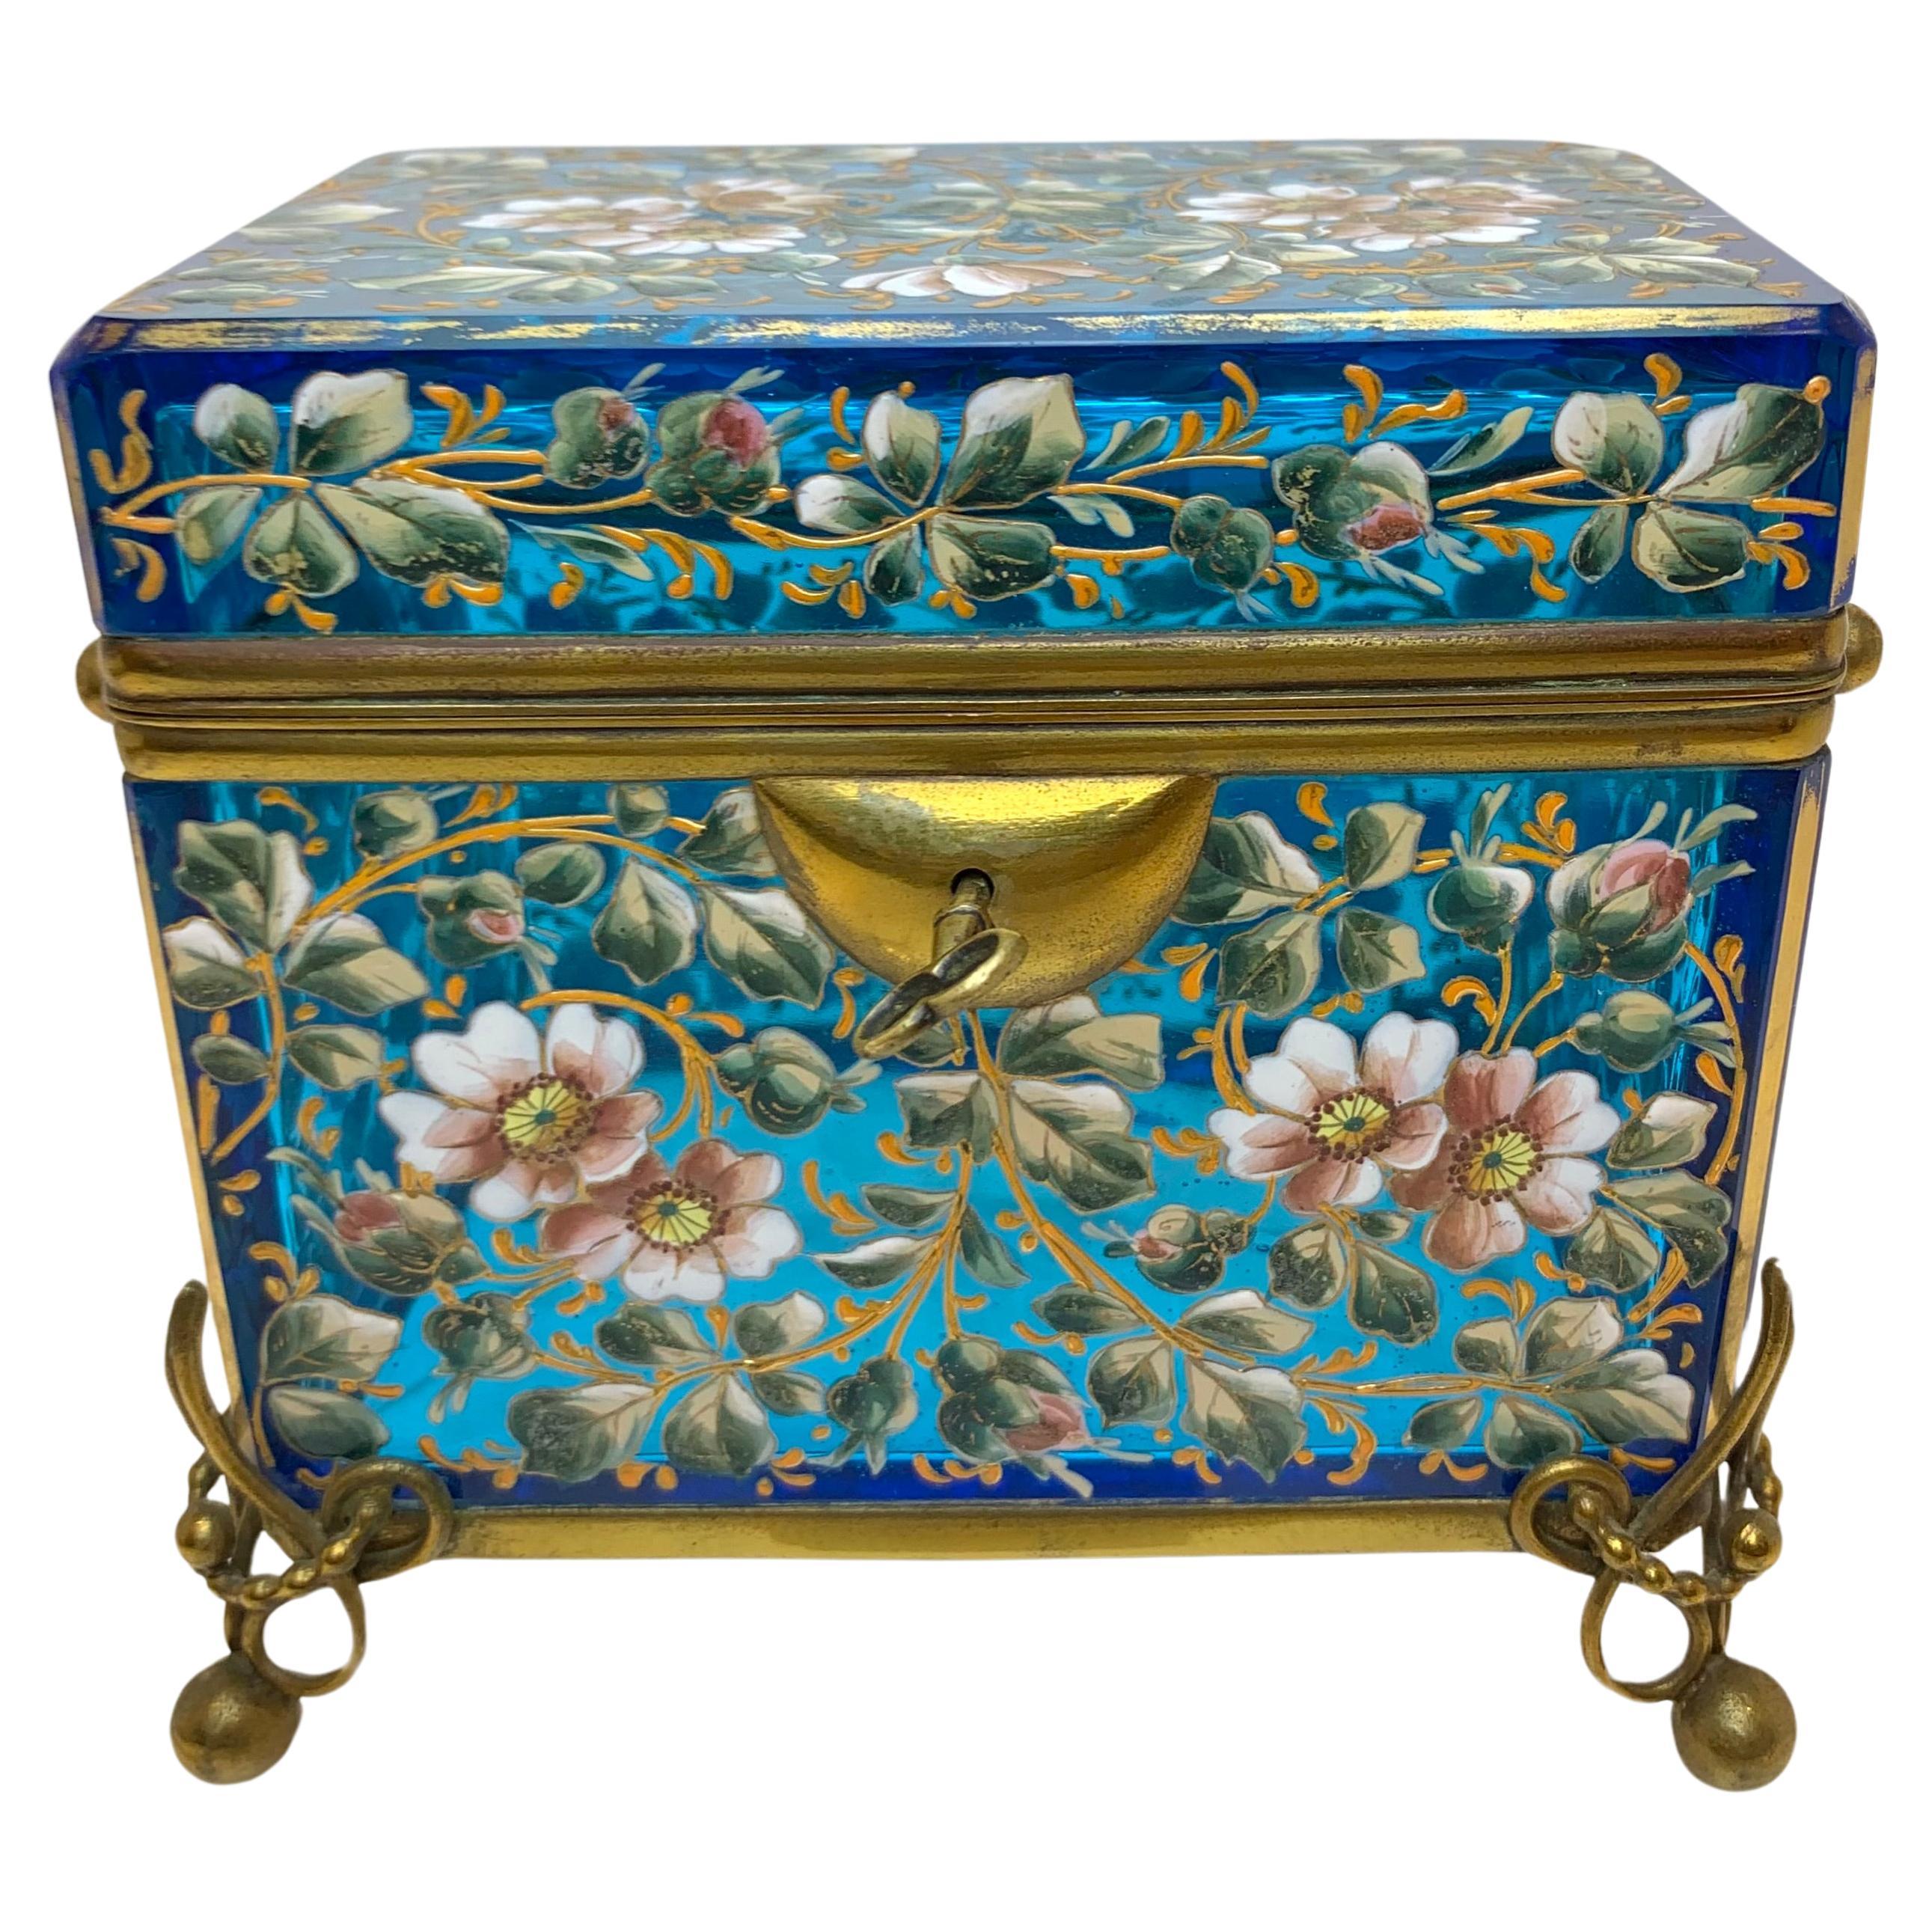 Antique Bohemian Moser Enameled Glass Jewelry Casket Box, 19th Century For Sale